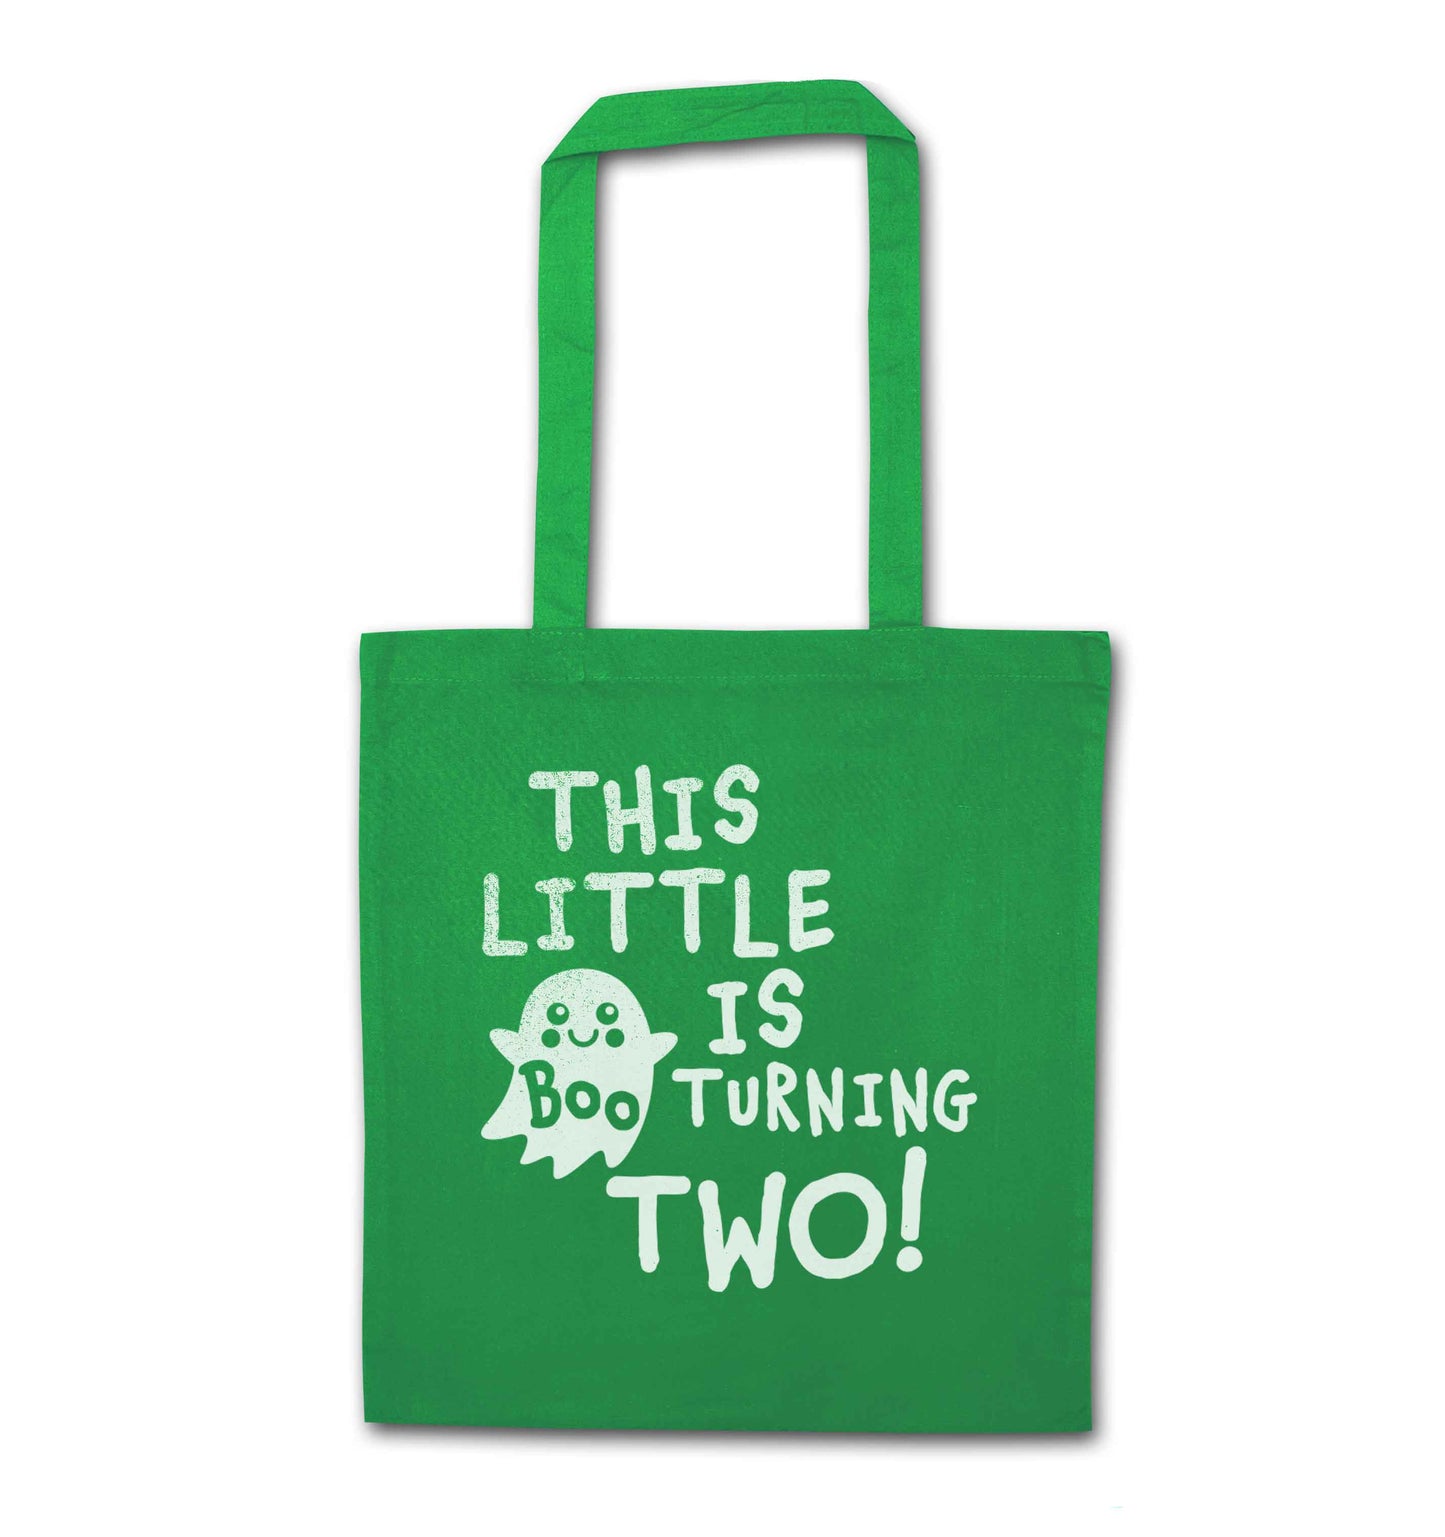 This little boo is turning two green tote bag